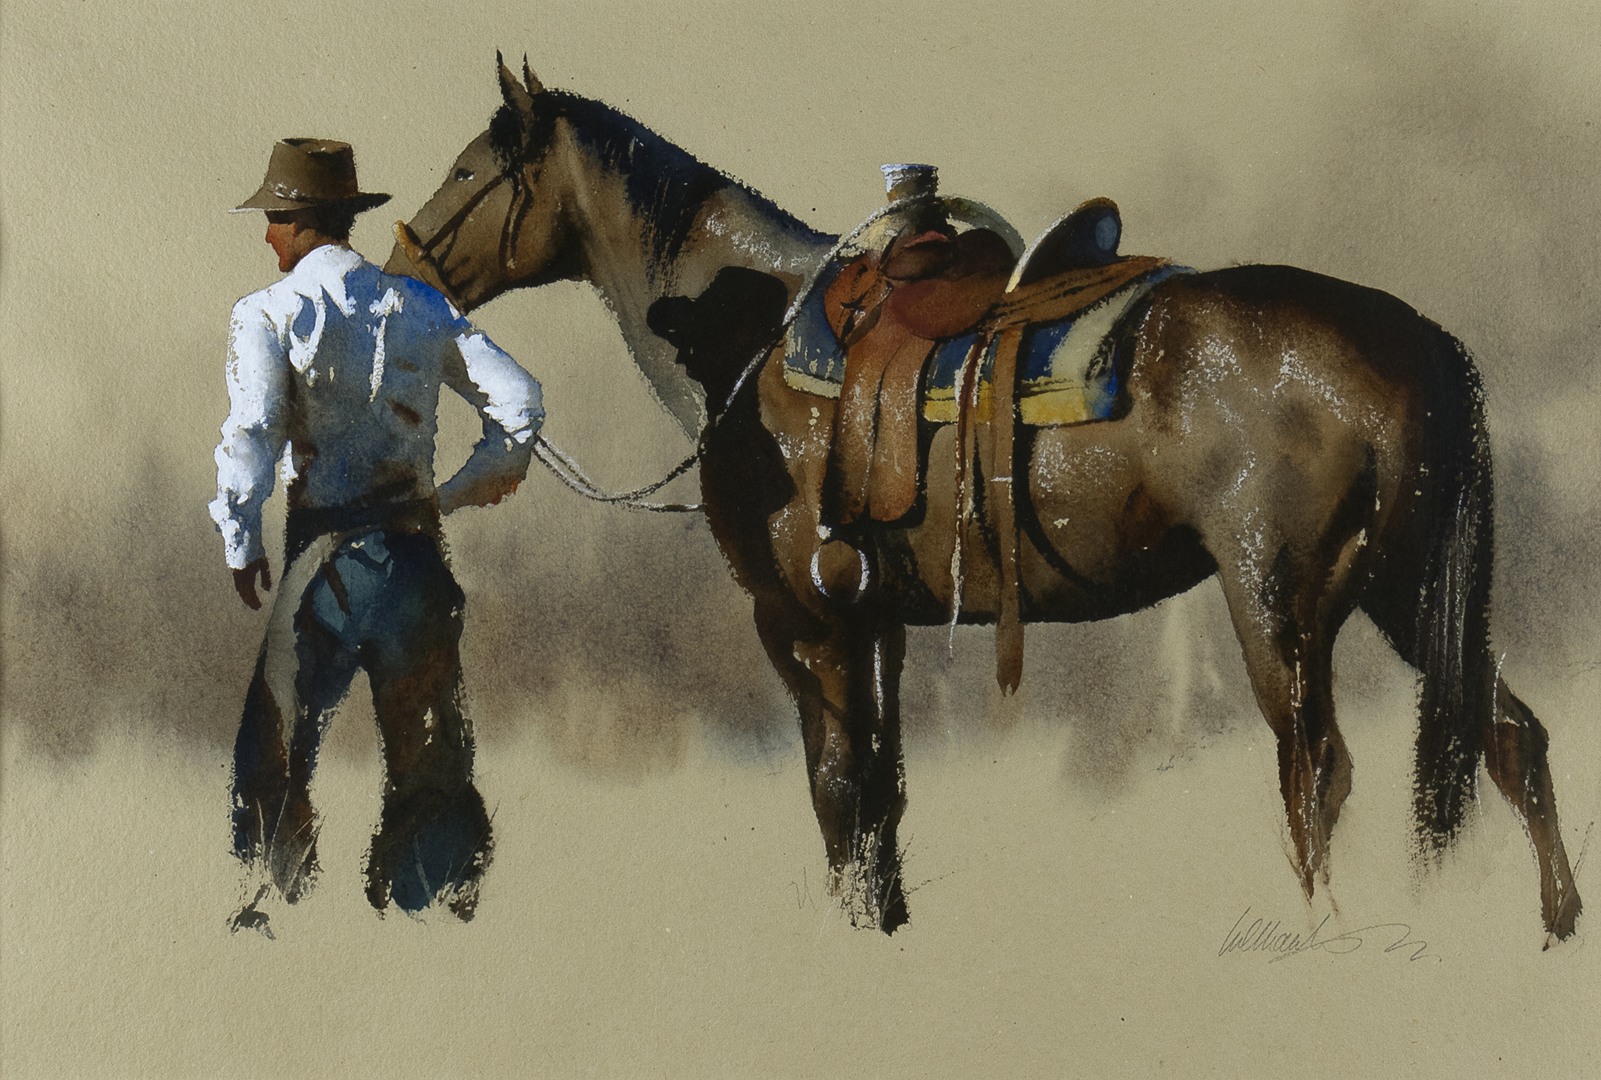 William Matthews (1949- ) Untitled (Cowboy and Horse) watercolor on paper 14 x 20 1/2